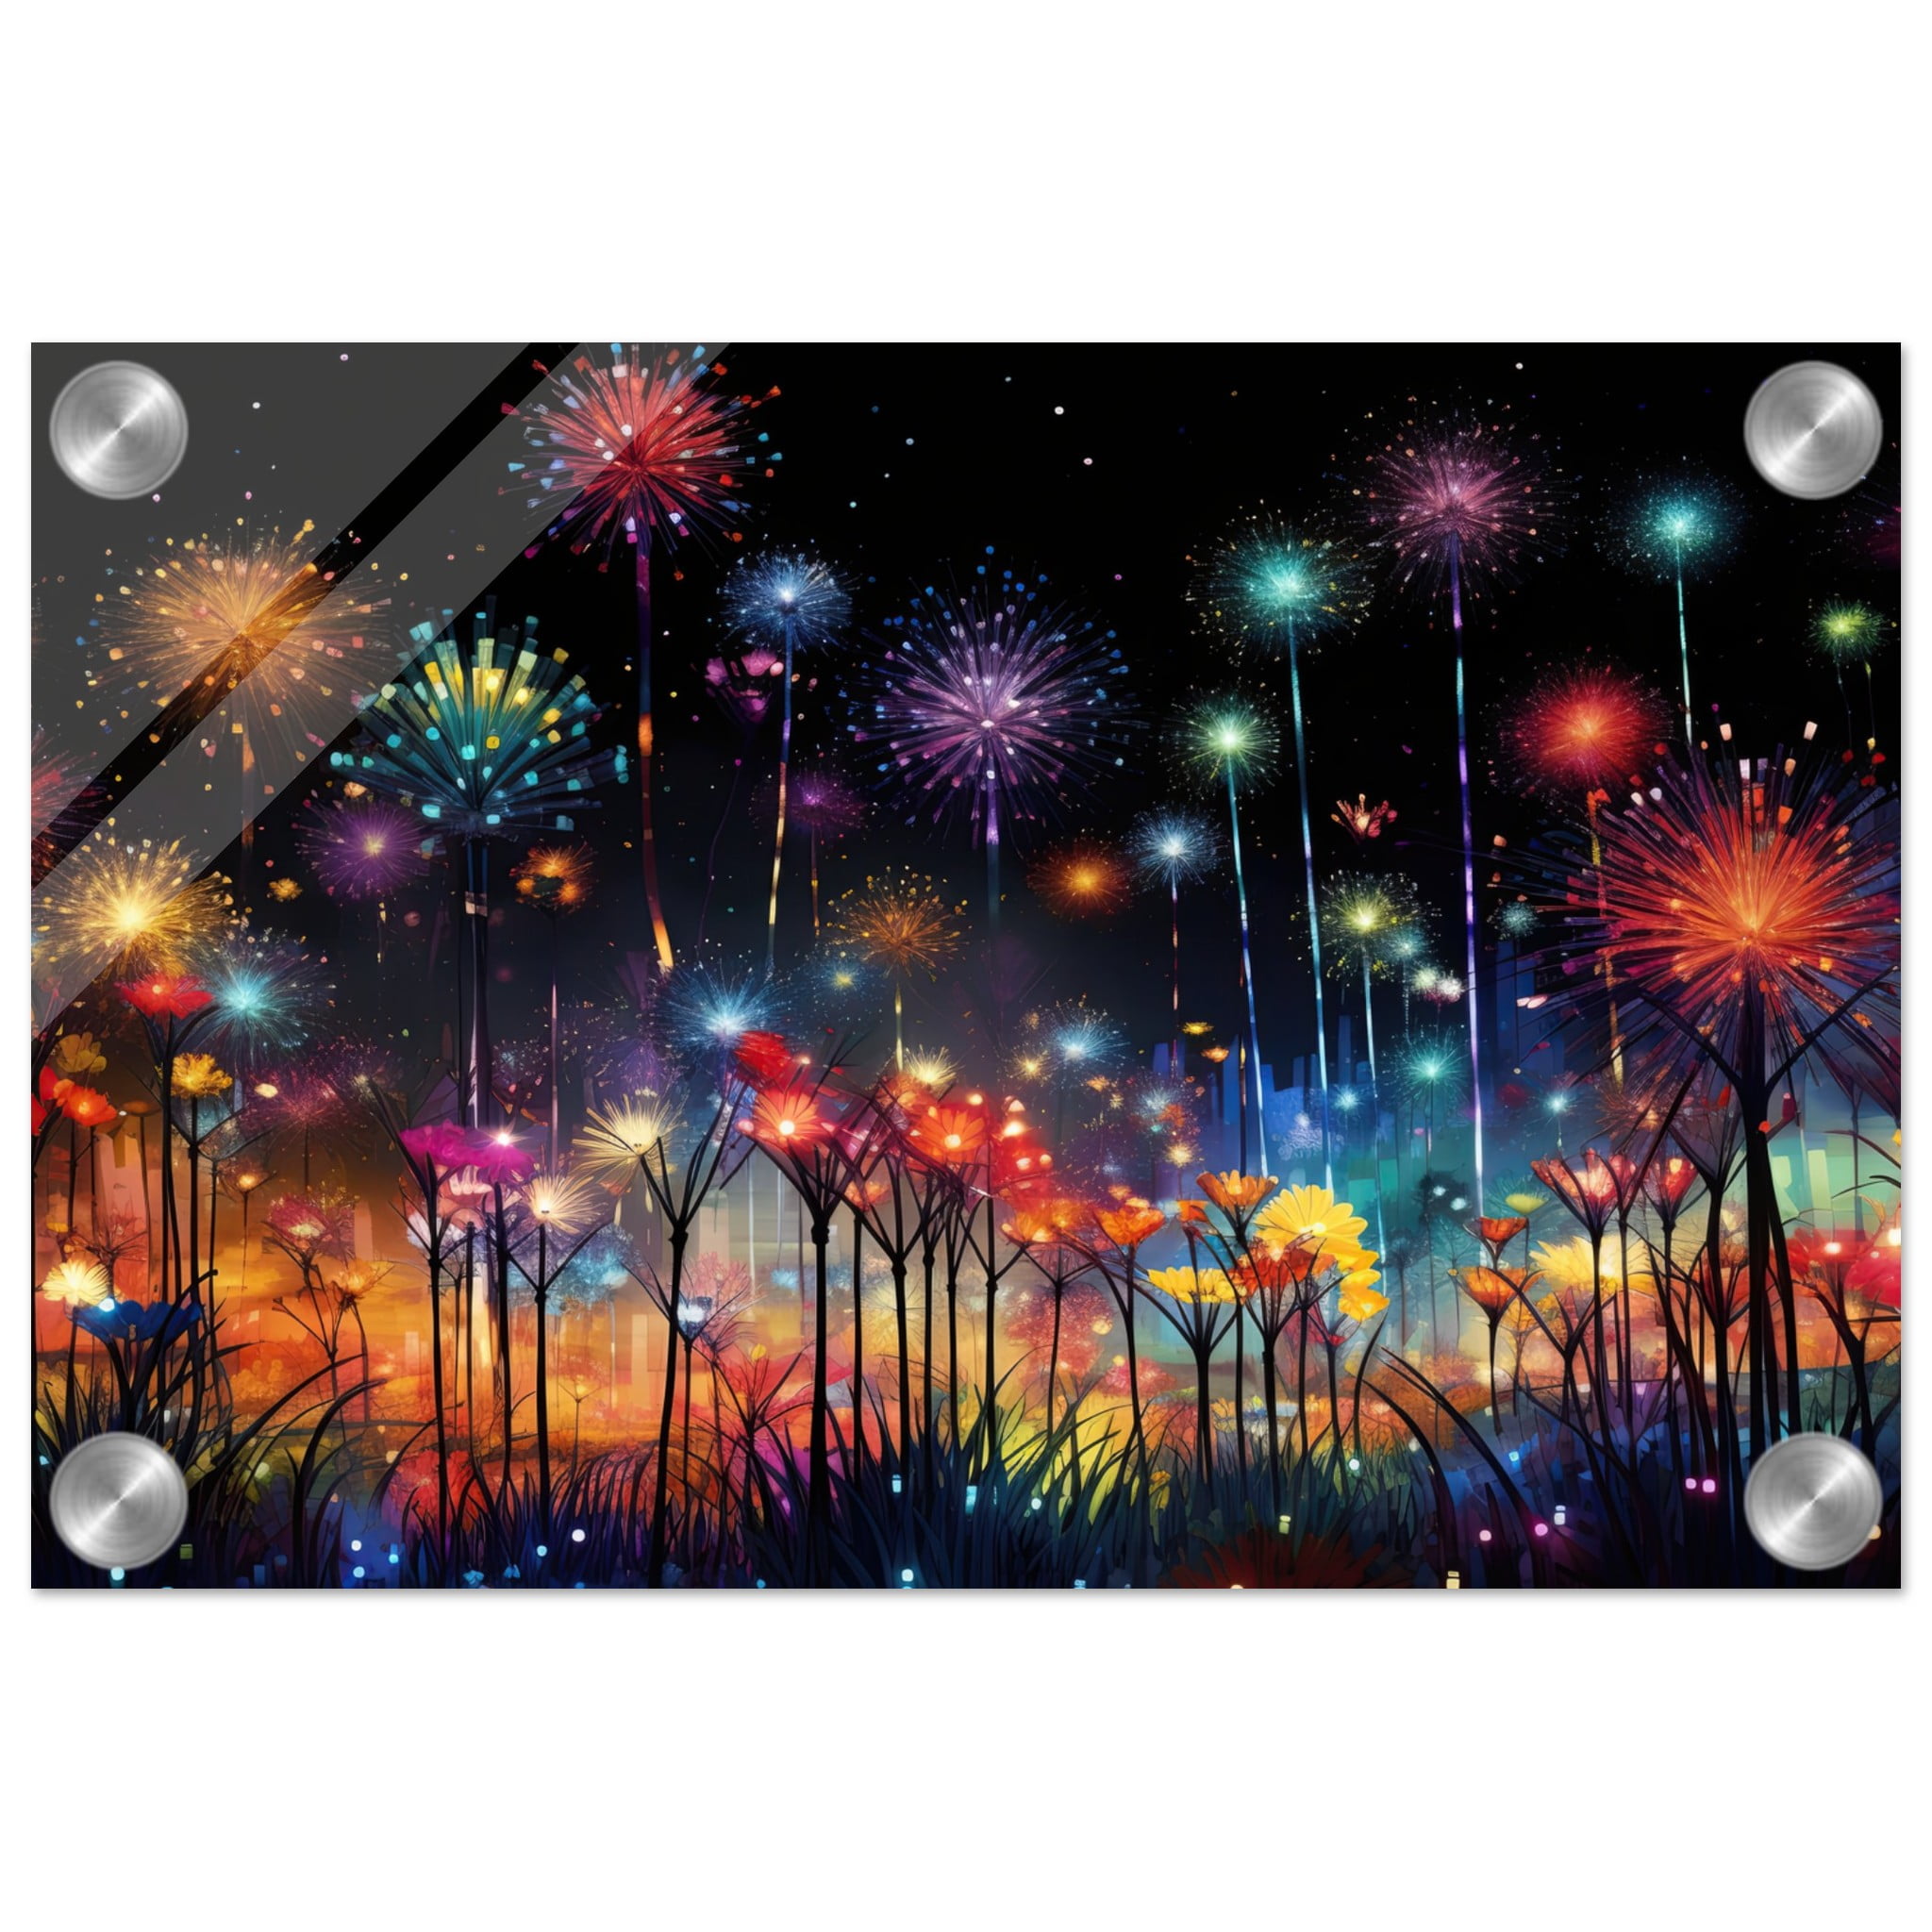 Fireworks and Flowers of Light and Color – Art Acrylic Print – 20×30 cm / 8×12″